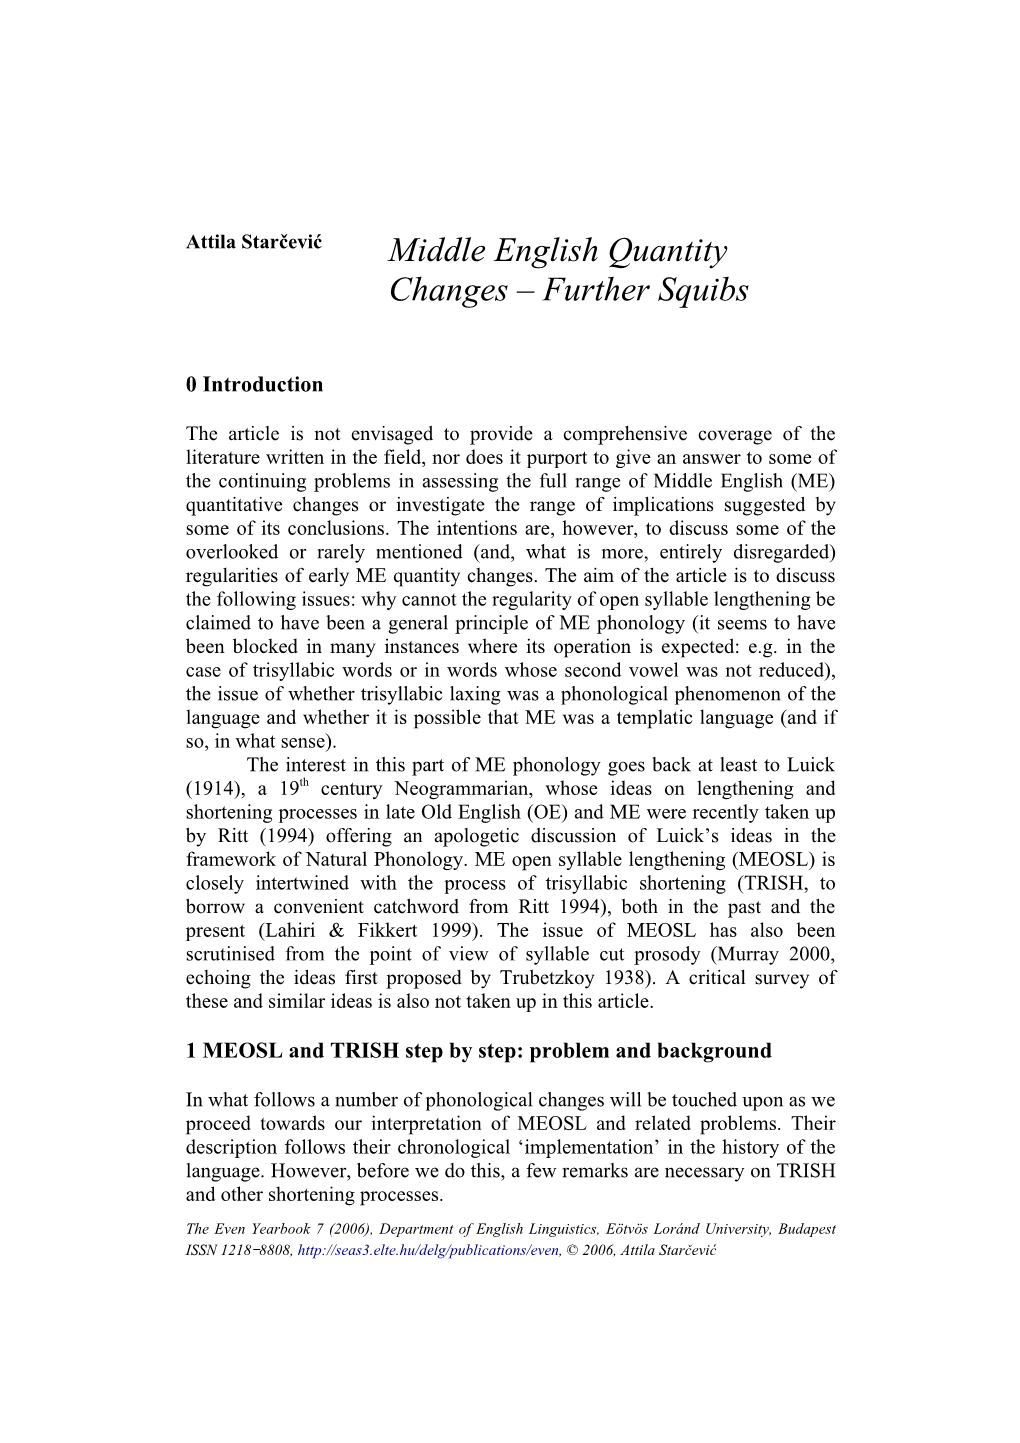 Middle English Quantity Changes – Further Squibs